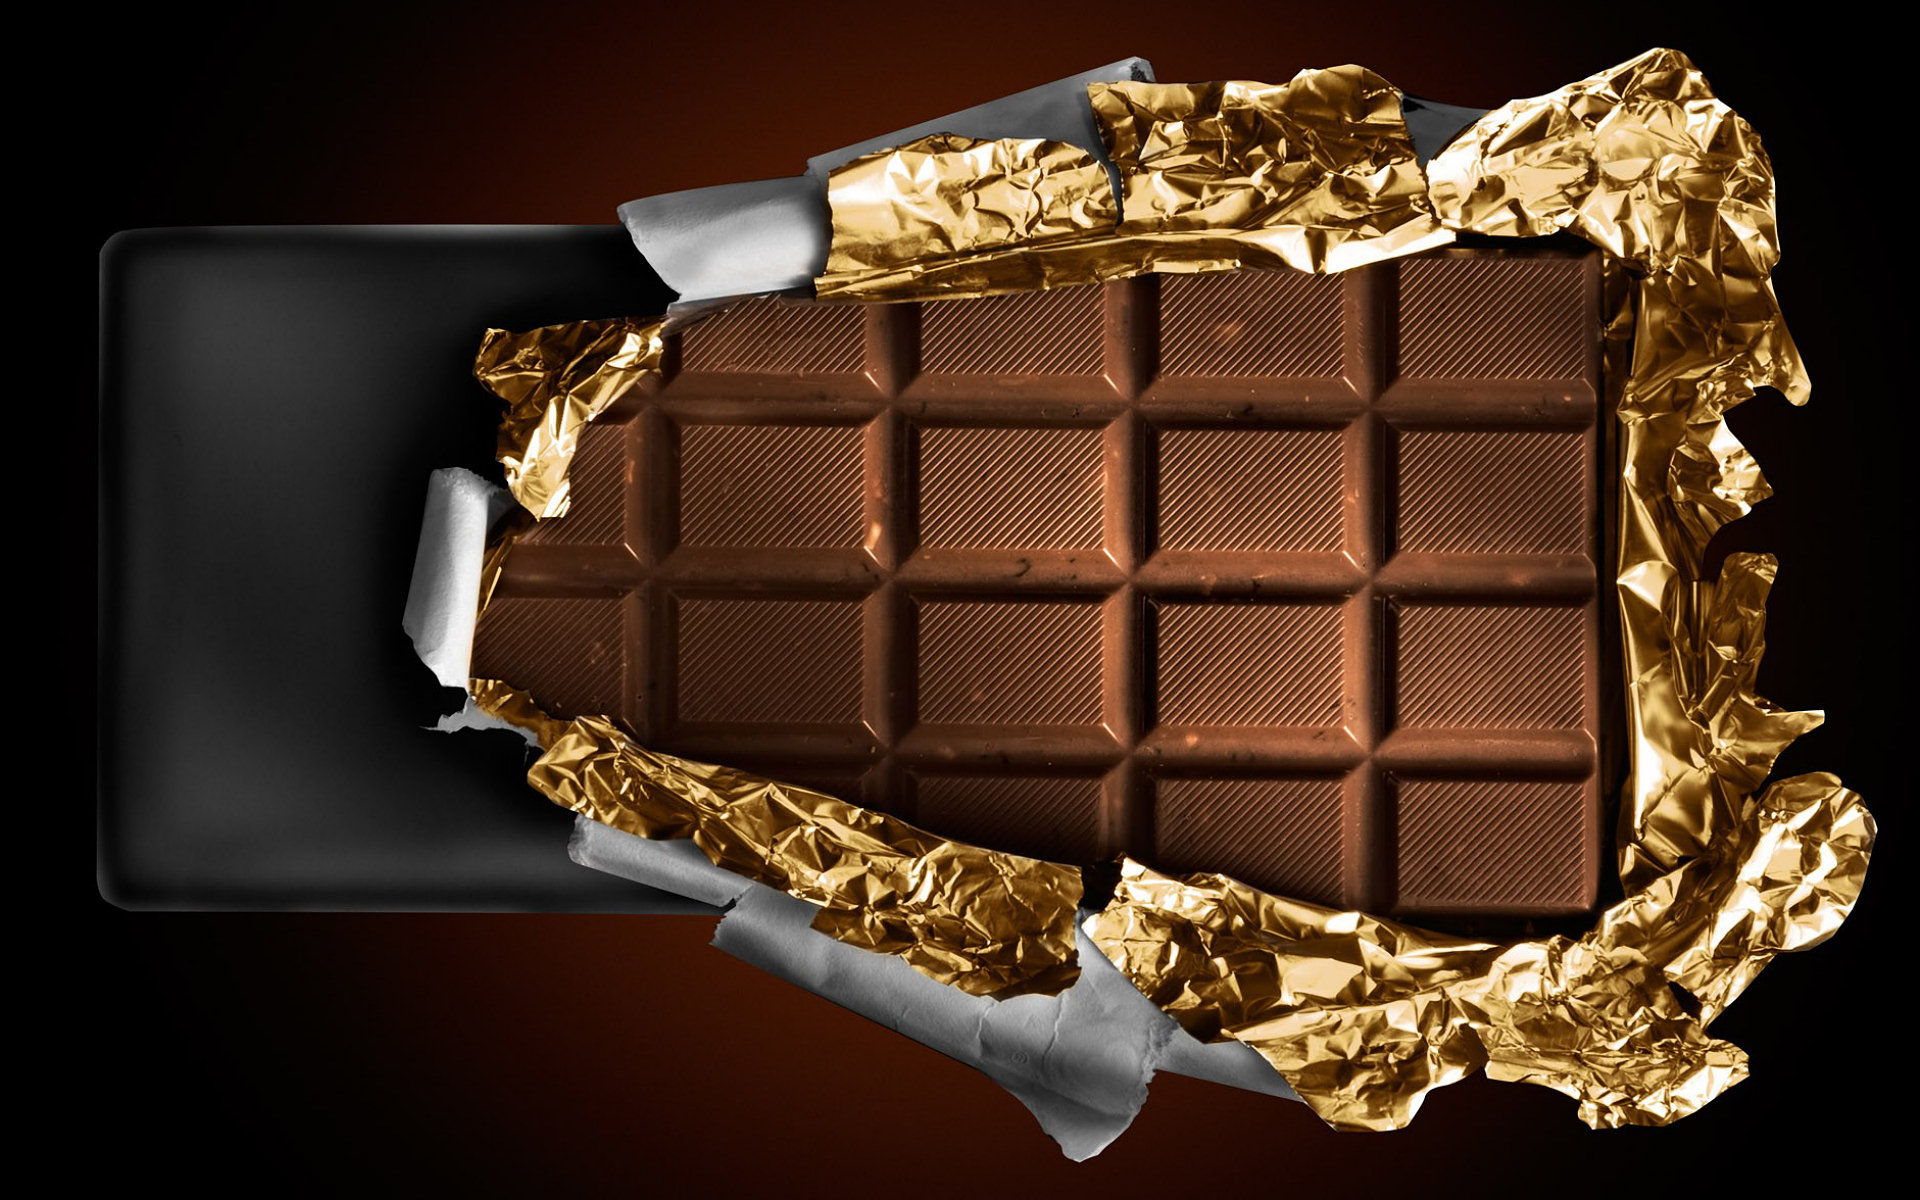 unwrapping a chocolate bar Wallpaper Background 29929